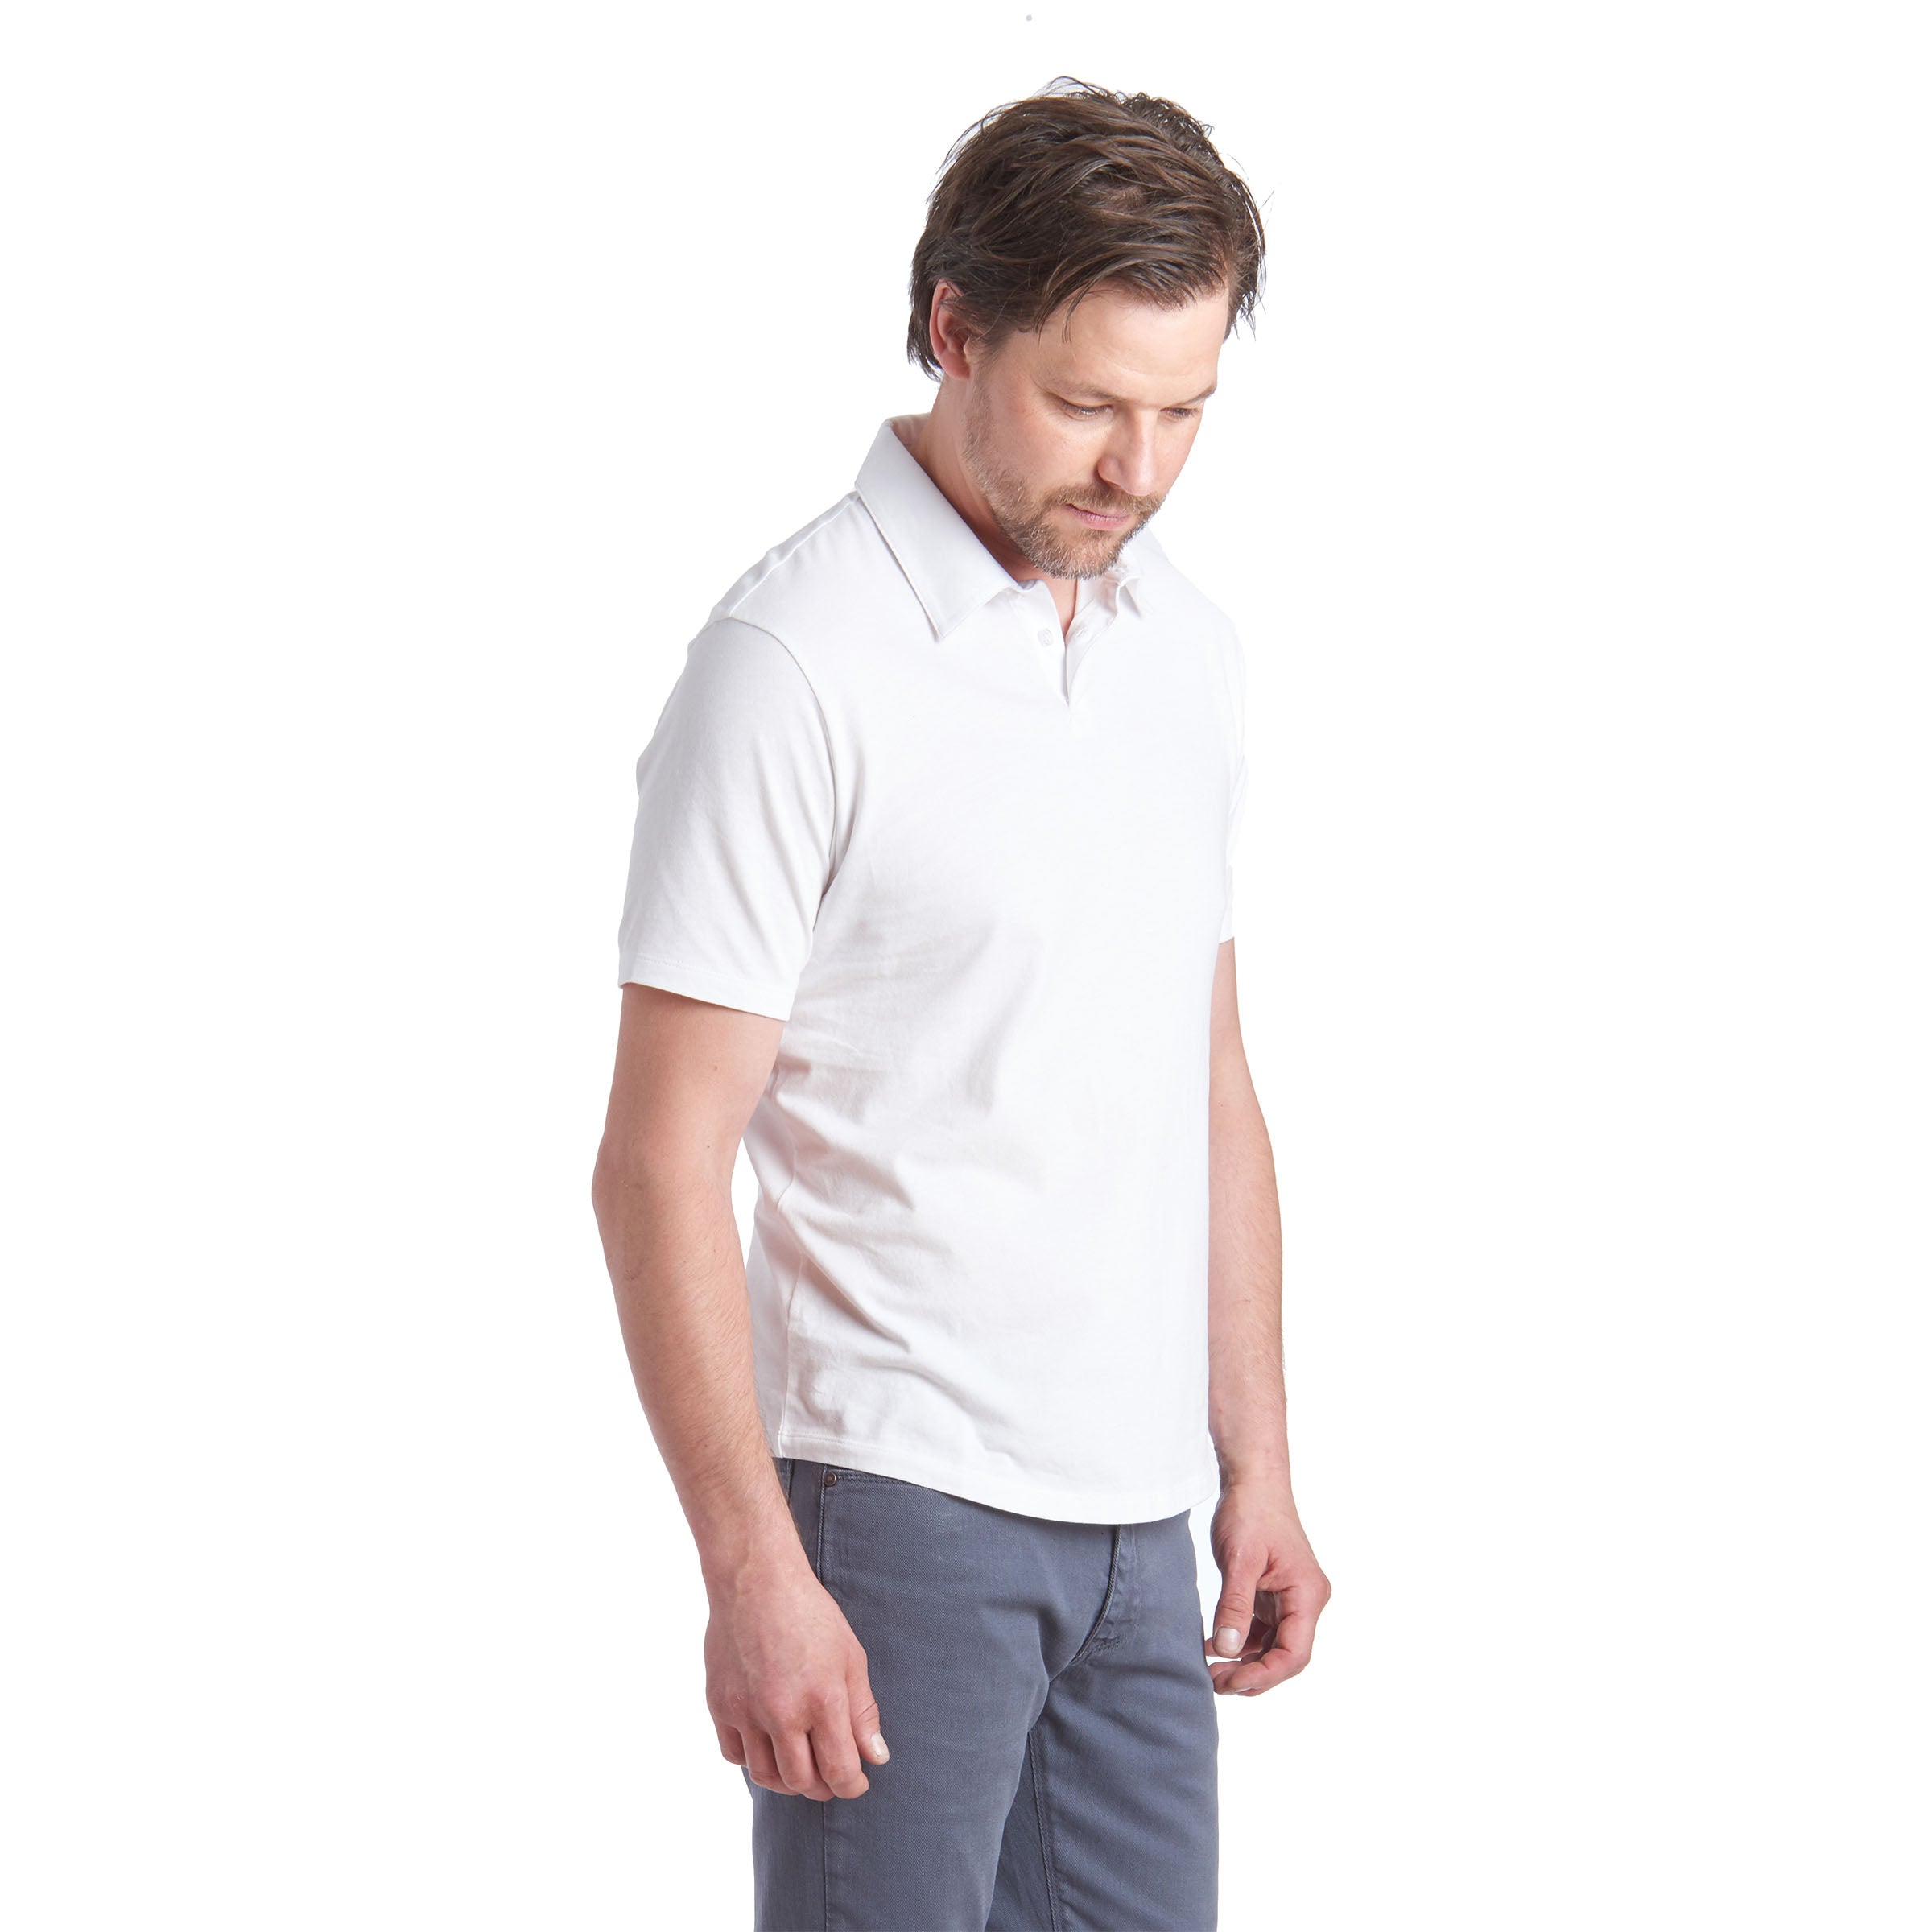 Men wearing Blanc Jersey Sueded Polo